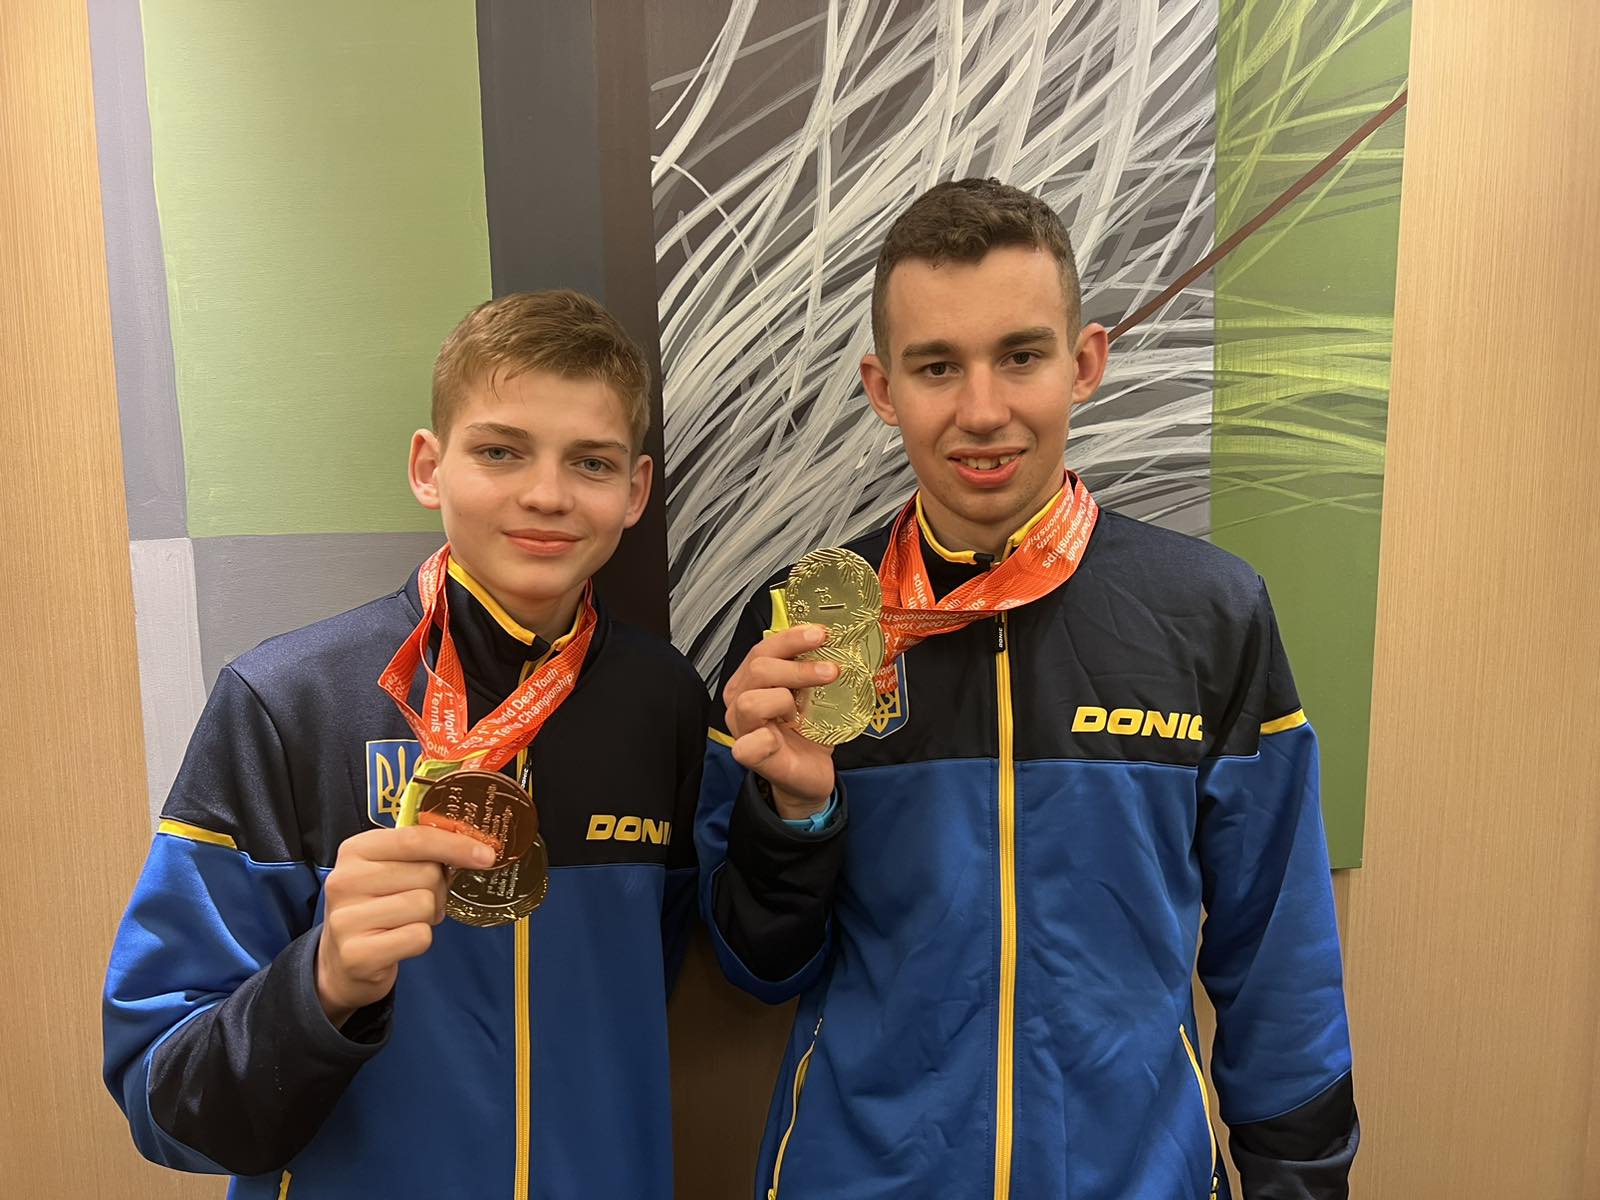 FPCS student Maksym Ovcharenko becomes the gold medalist of the World Table Tennis Championships in China 